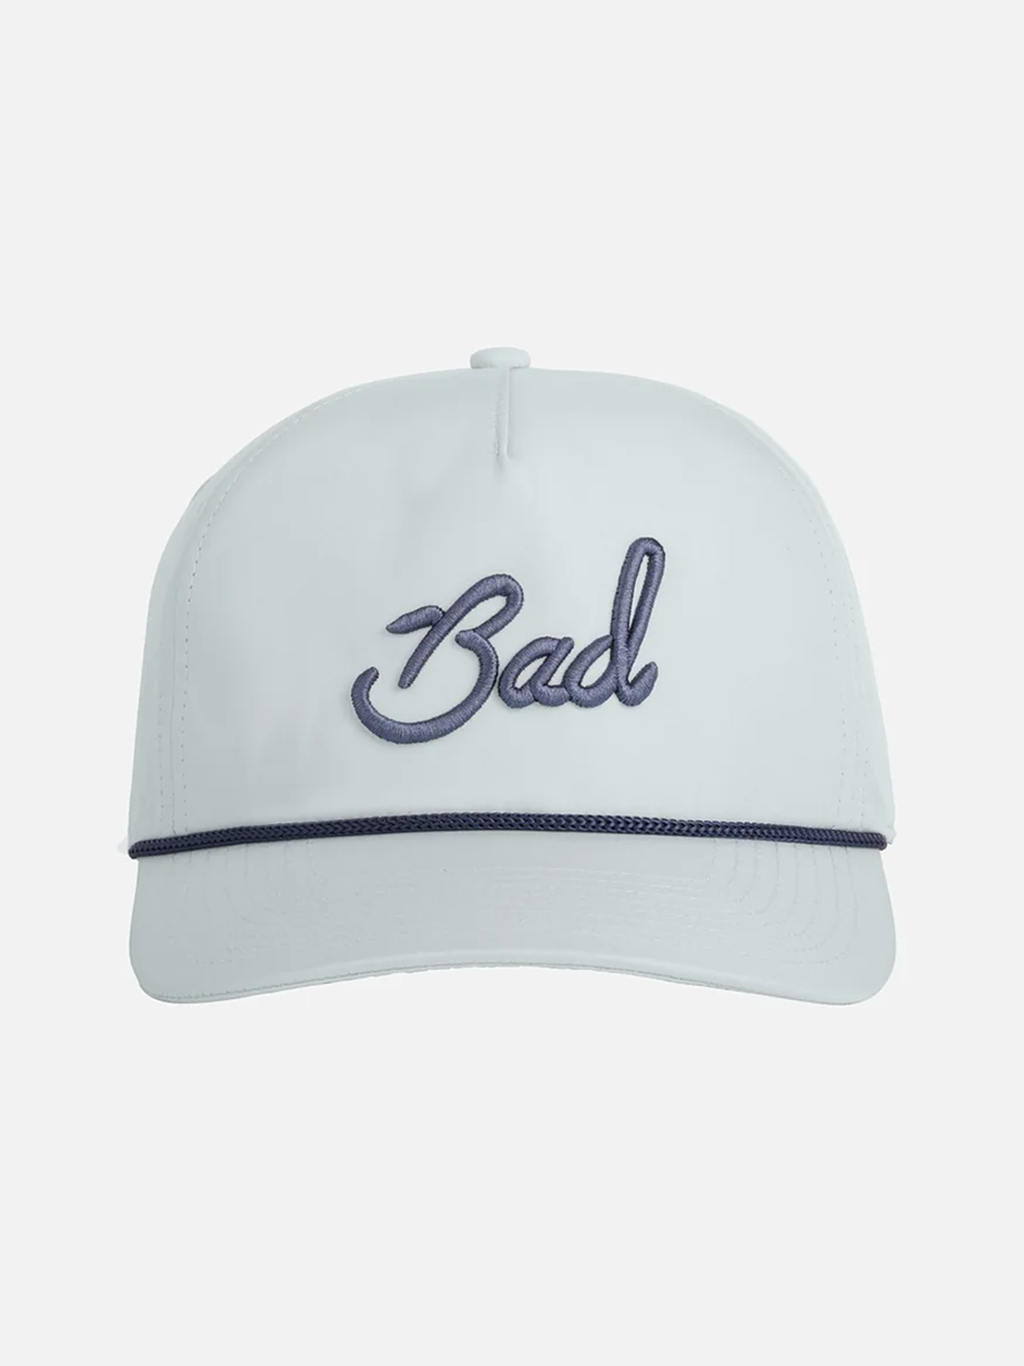 Bad Rope Hat in Baby Blue